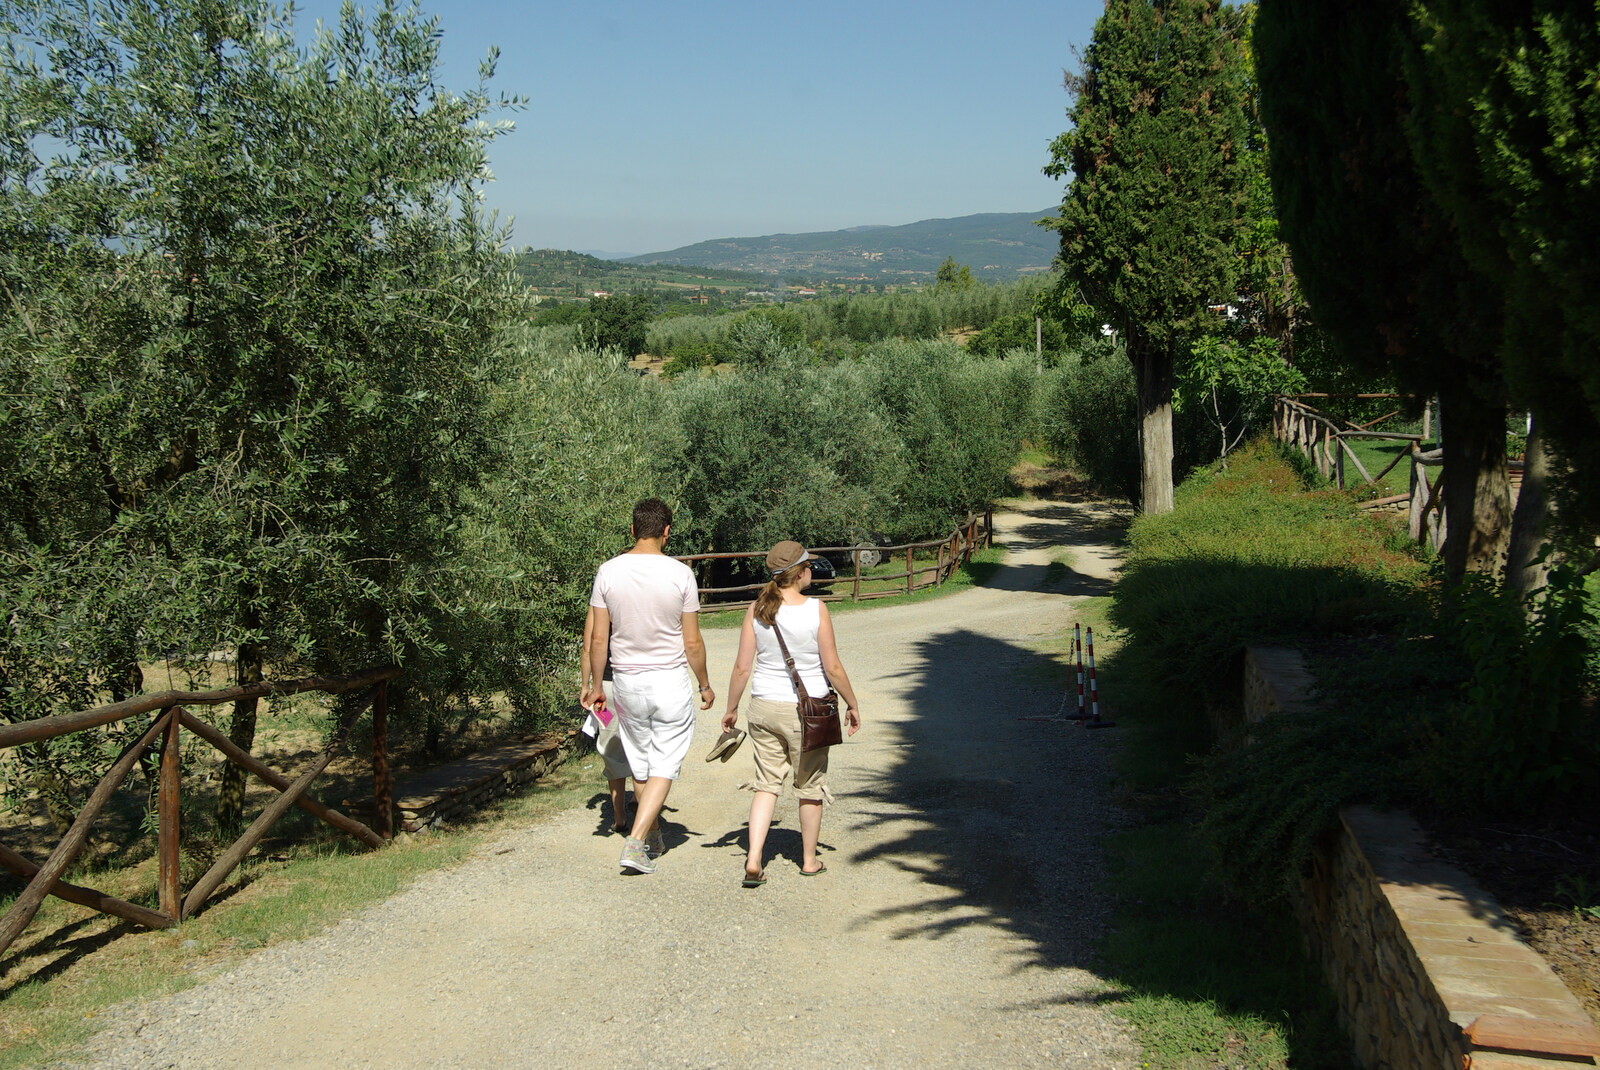 Tenuta Il Palazzo in Arezzo, Tuscany, Italy - 22nd July 2008: Pieter and Isobel wander off down the lane